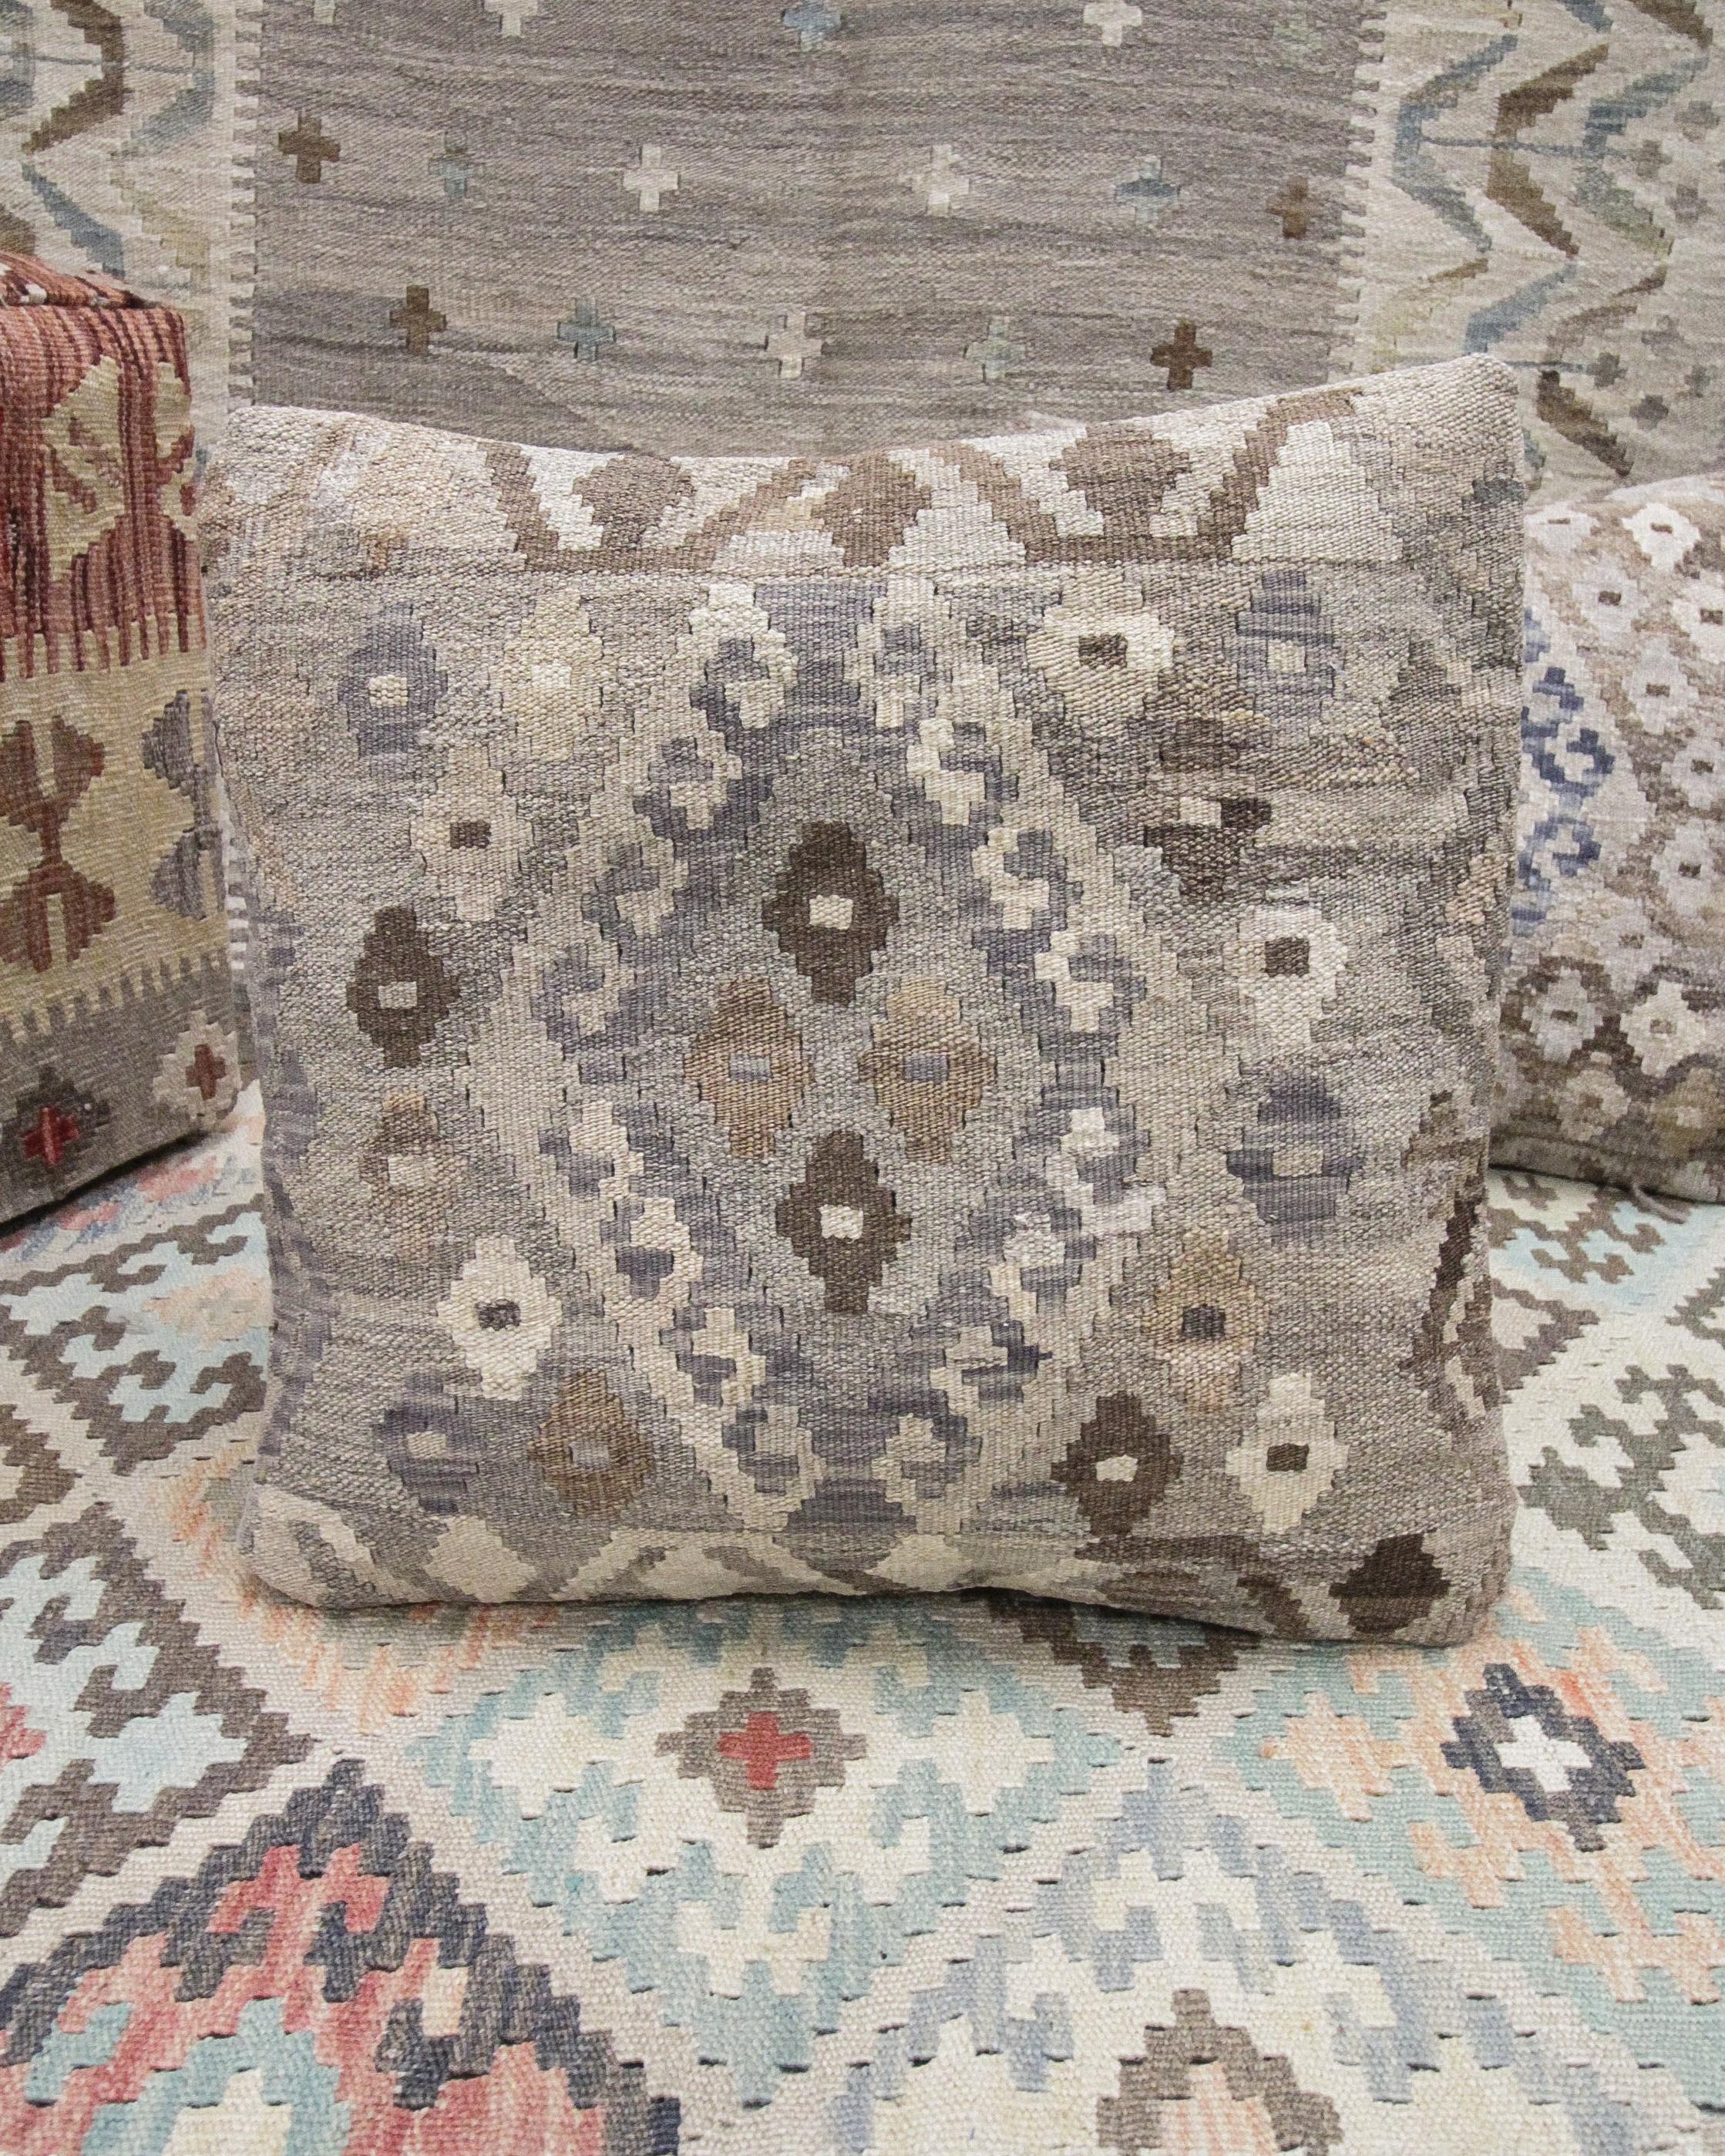 This new traditional kilim cushion cover is a handwoven piece constructed in the early 21st century. The design has been delicately woven by hand and features a symmetrical geometric pattern that is sure to stand out on any sofa or armchair! This